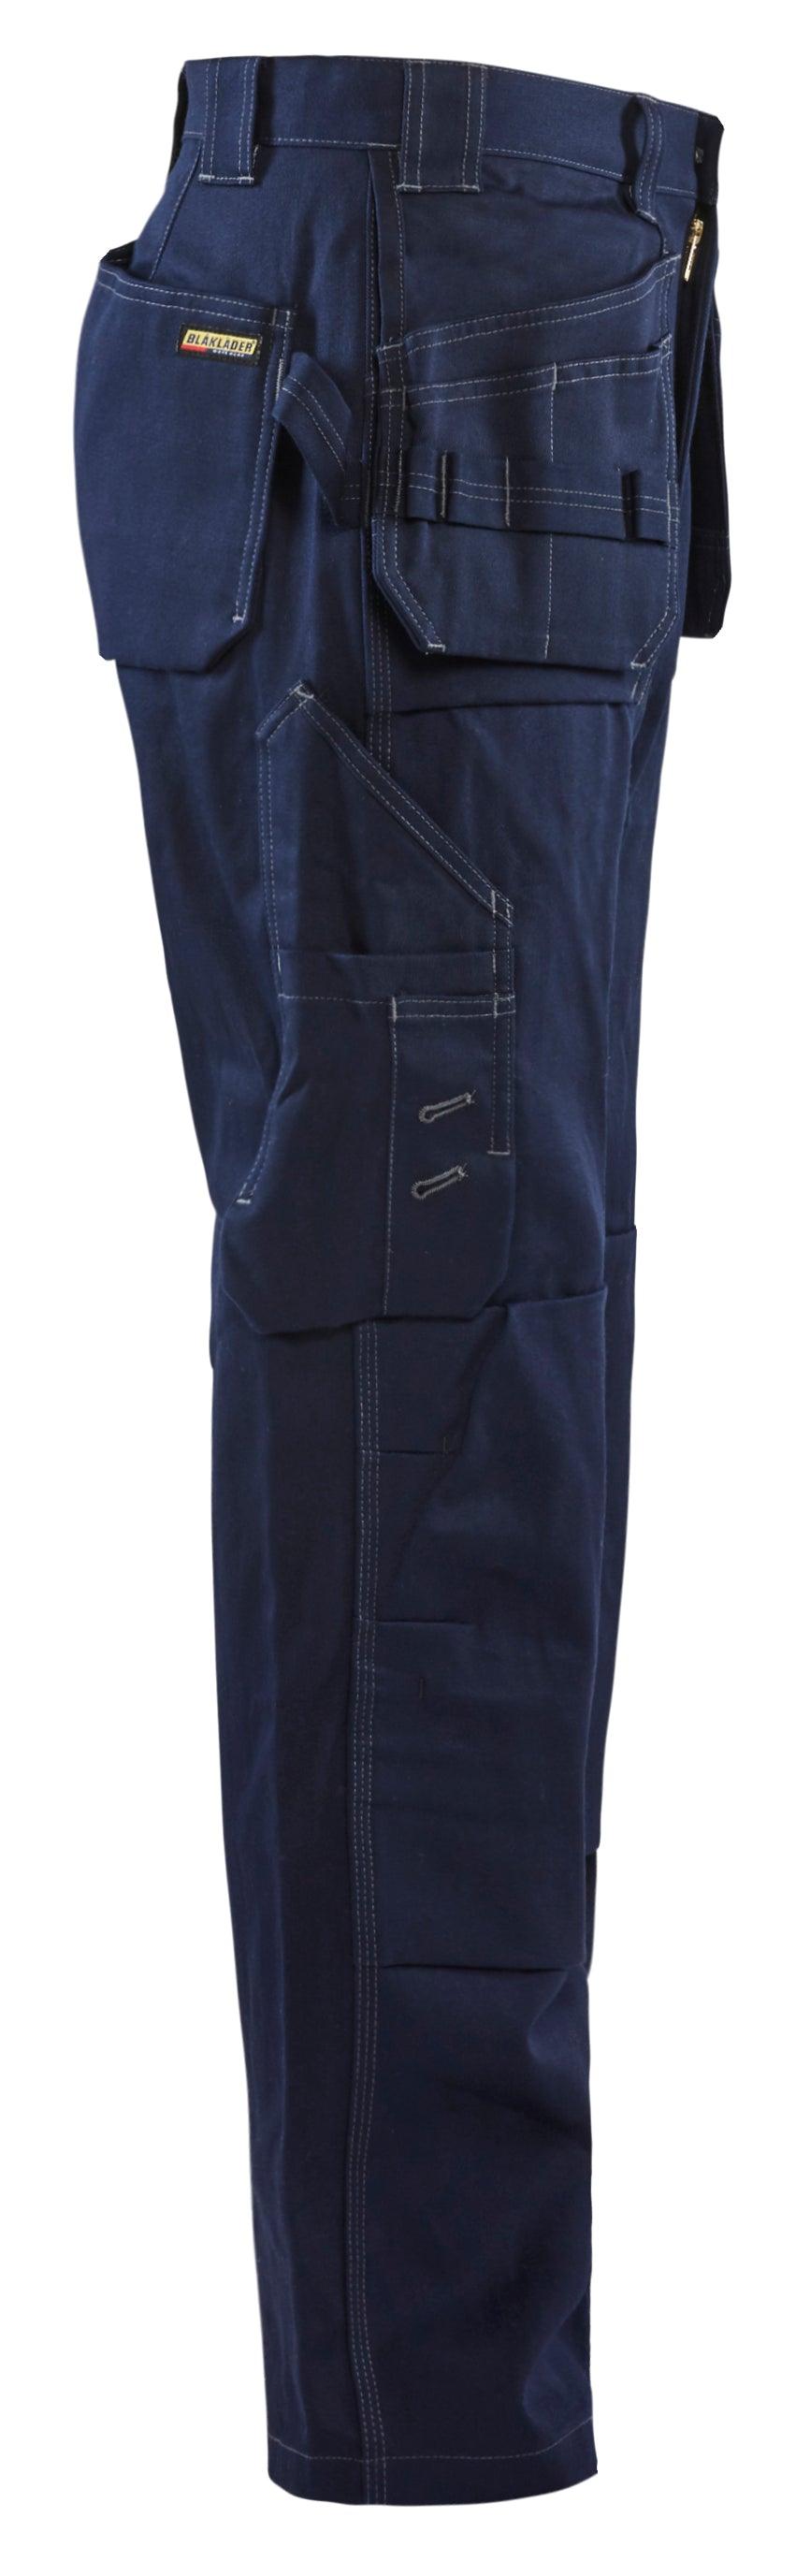 Blaklader 1636 10oz Flame Resistant Work Pants with Utility Pockets - Navy Blue - Trusted Gear Company LLC